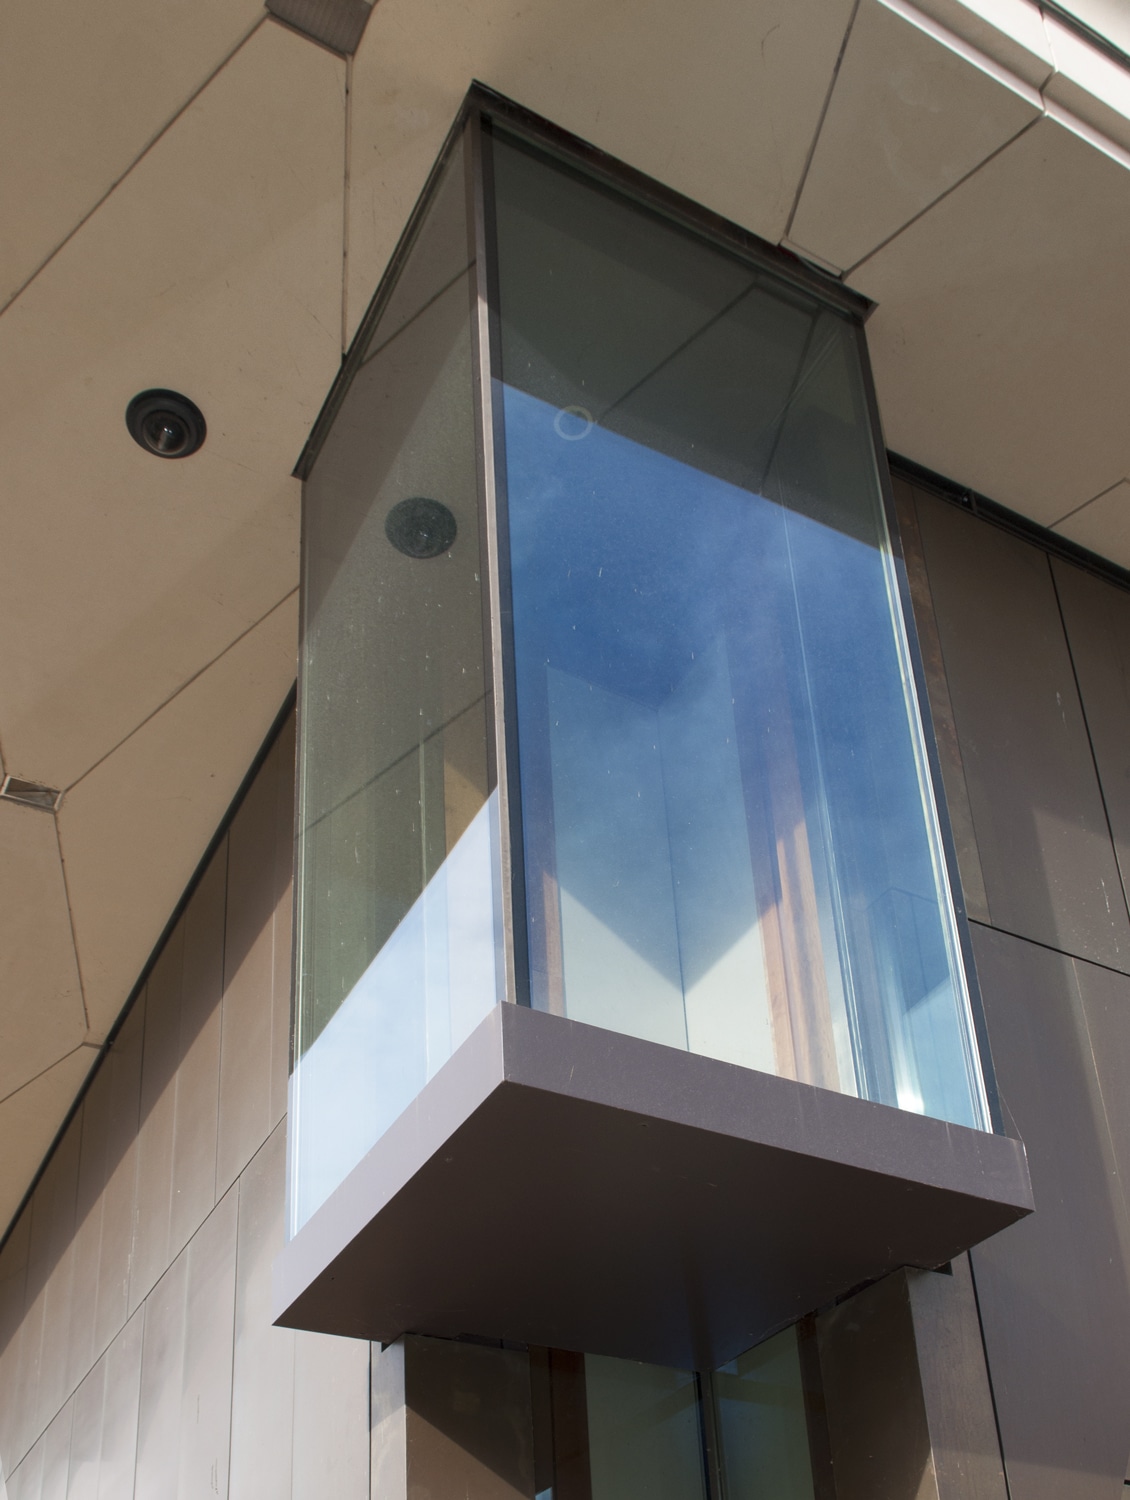 Image of corner window detail at Chazen Museum of Art in Madison, Wisconsin. Rainscreen cladding system by Riverside Group.